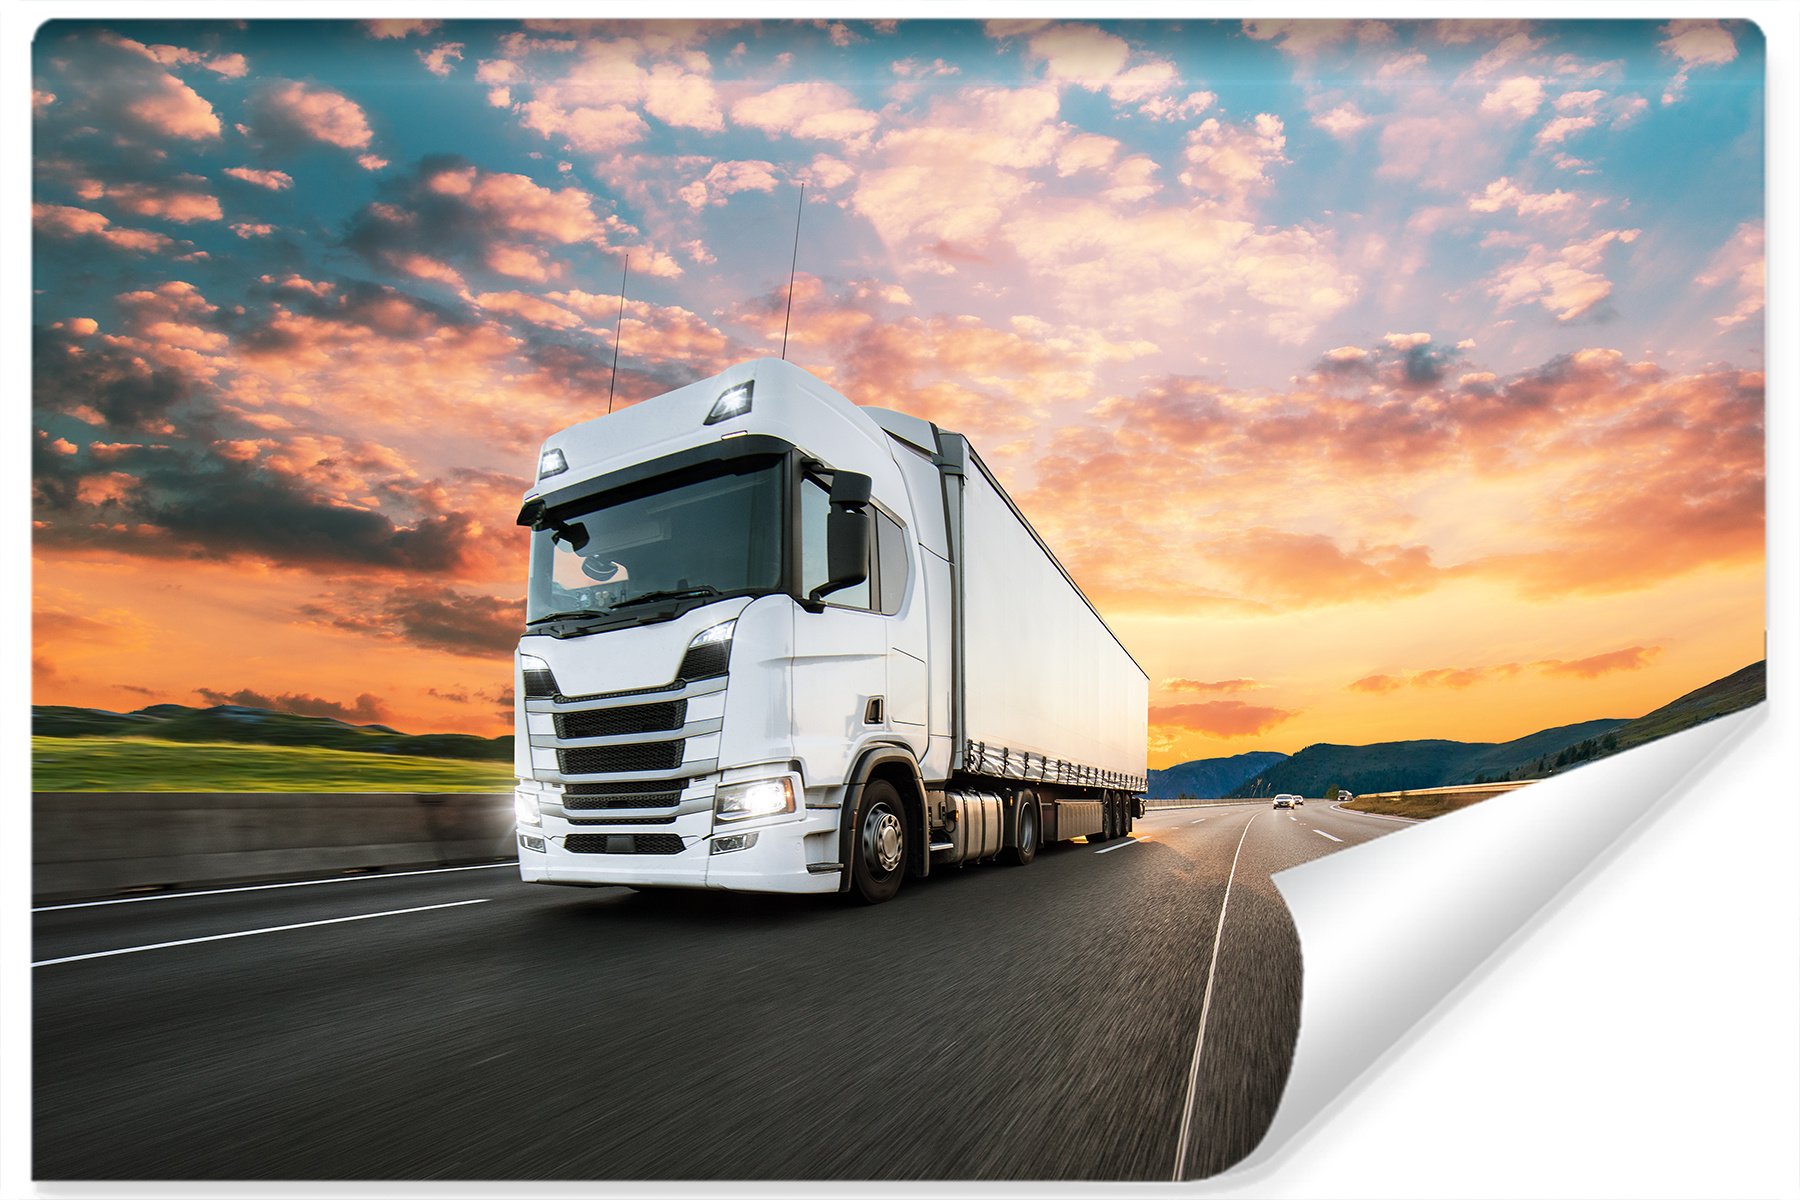 Photo wallpaper Truck with a beautiful sky Non-woven 104 x 70.5 cm FT-2898-VEM